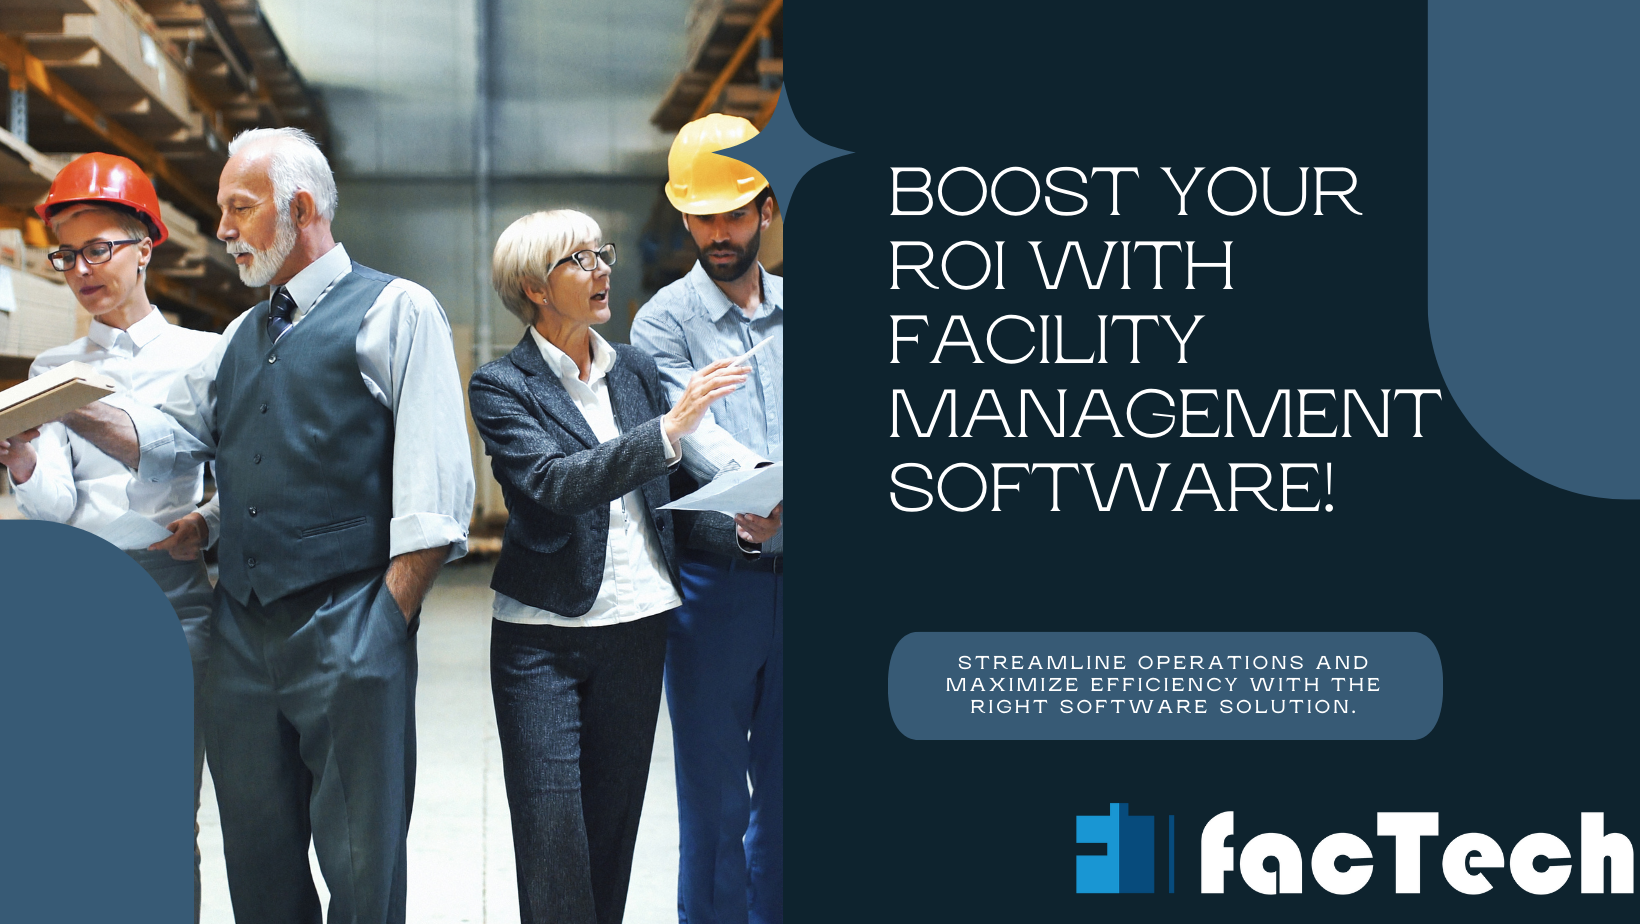 Boost Your ROI with Facility Management Software!